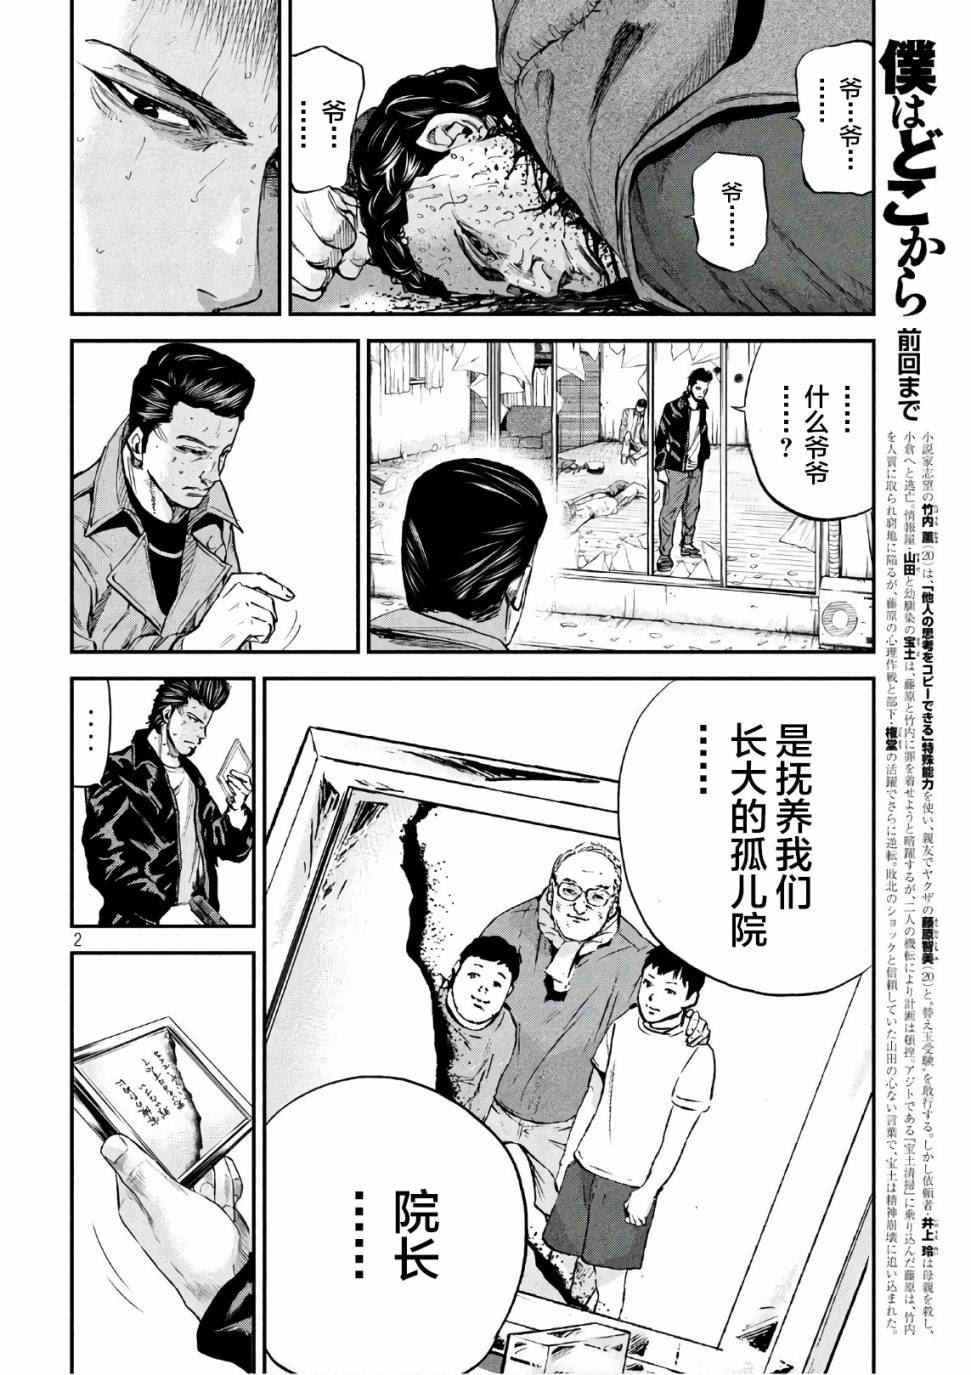 Where Do I Come From？ - 第27話 - 2